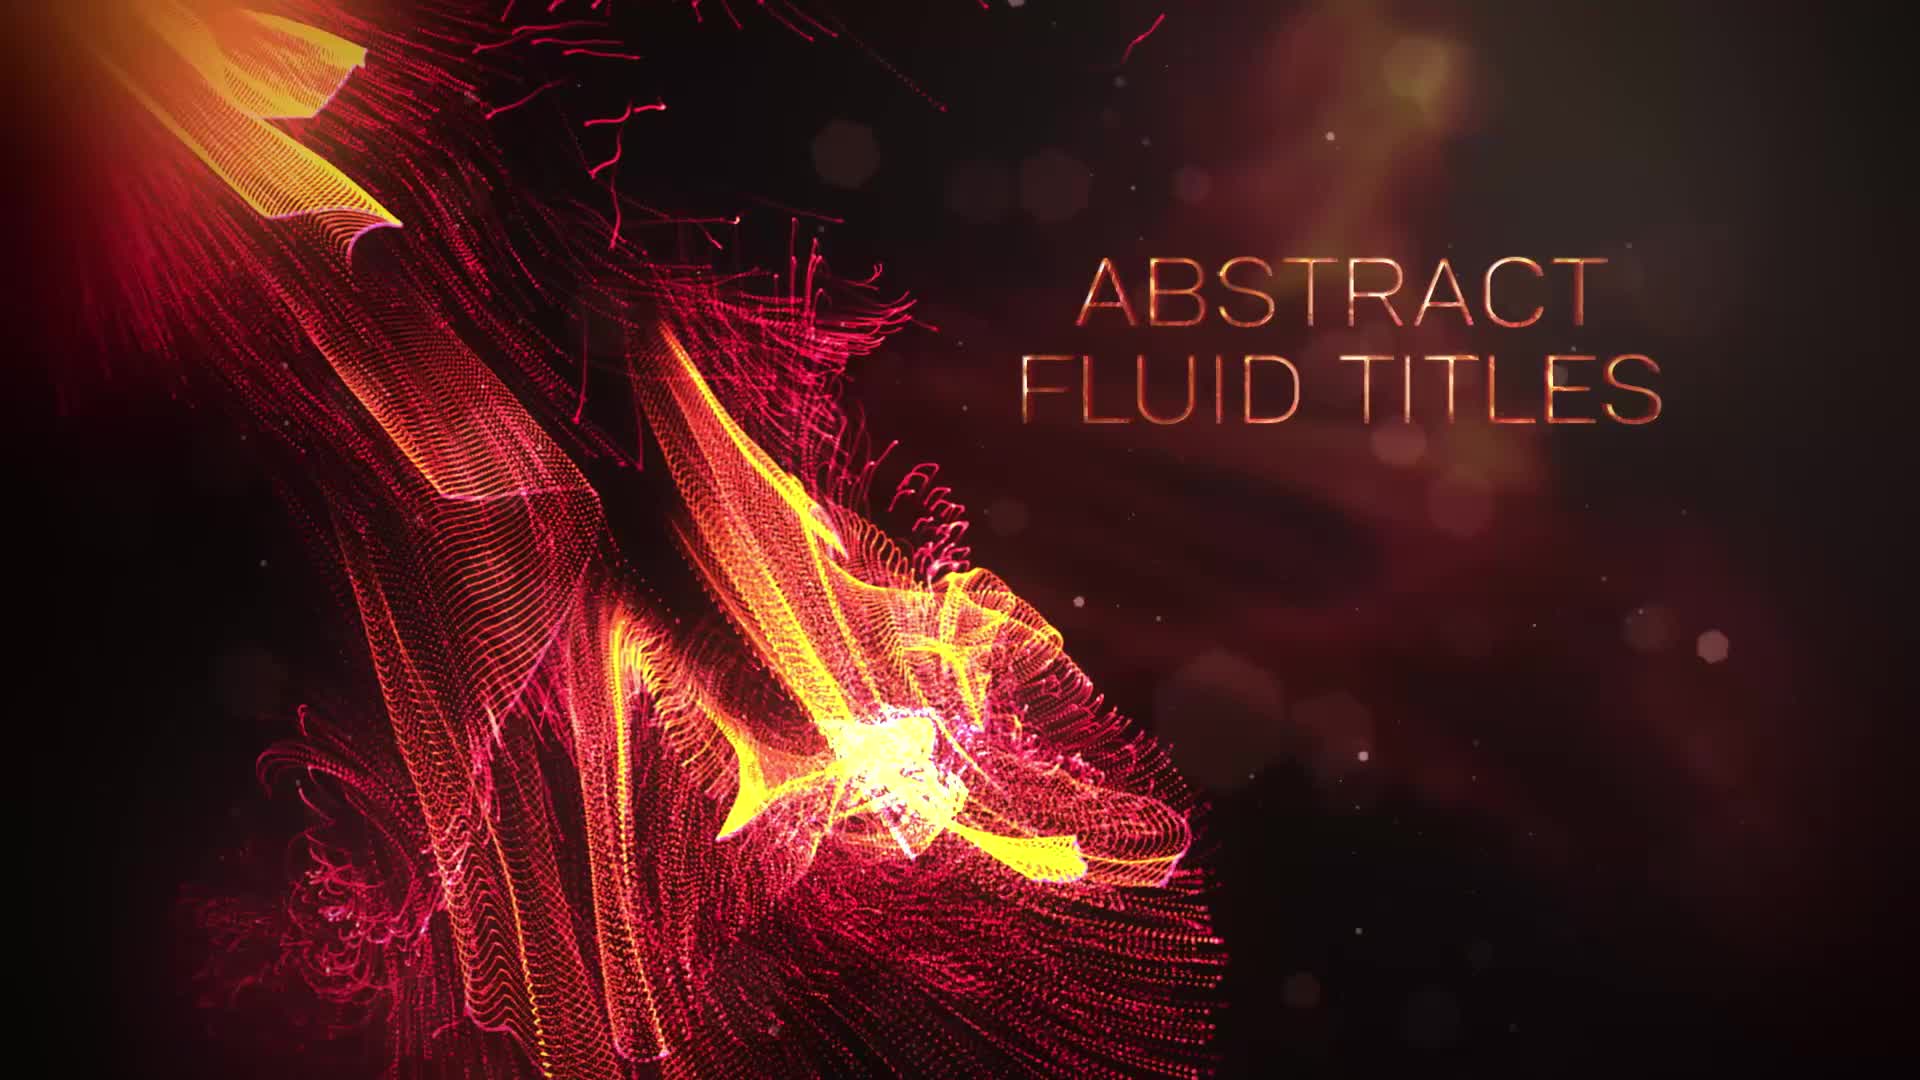 Abstract Fluid Titles